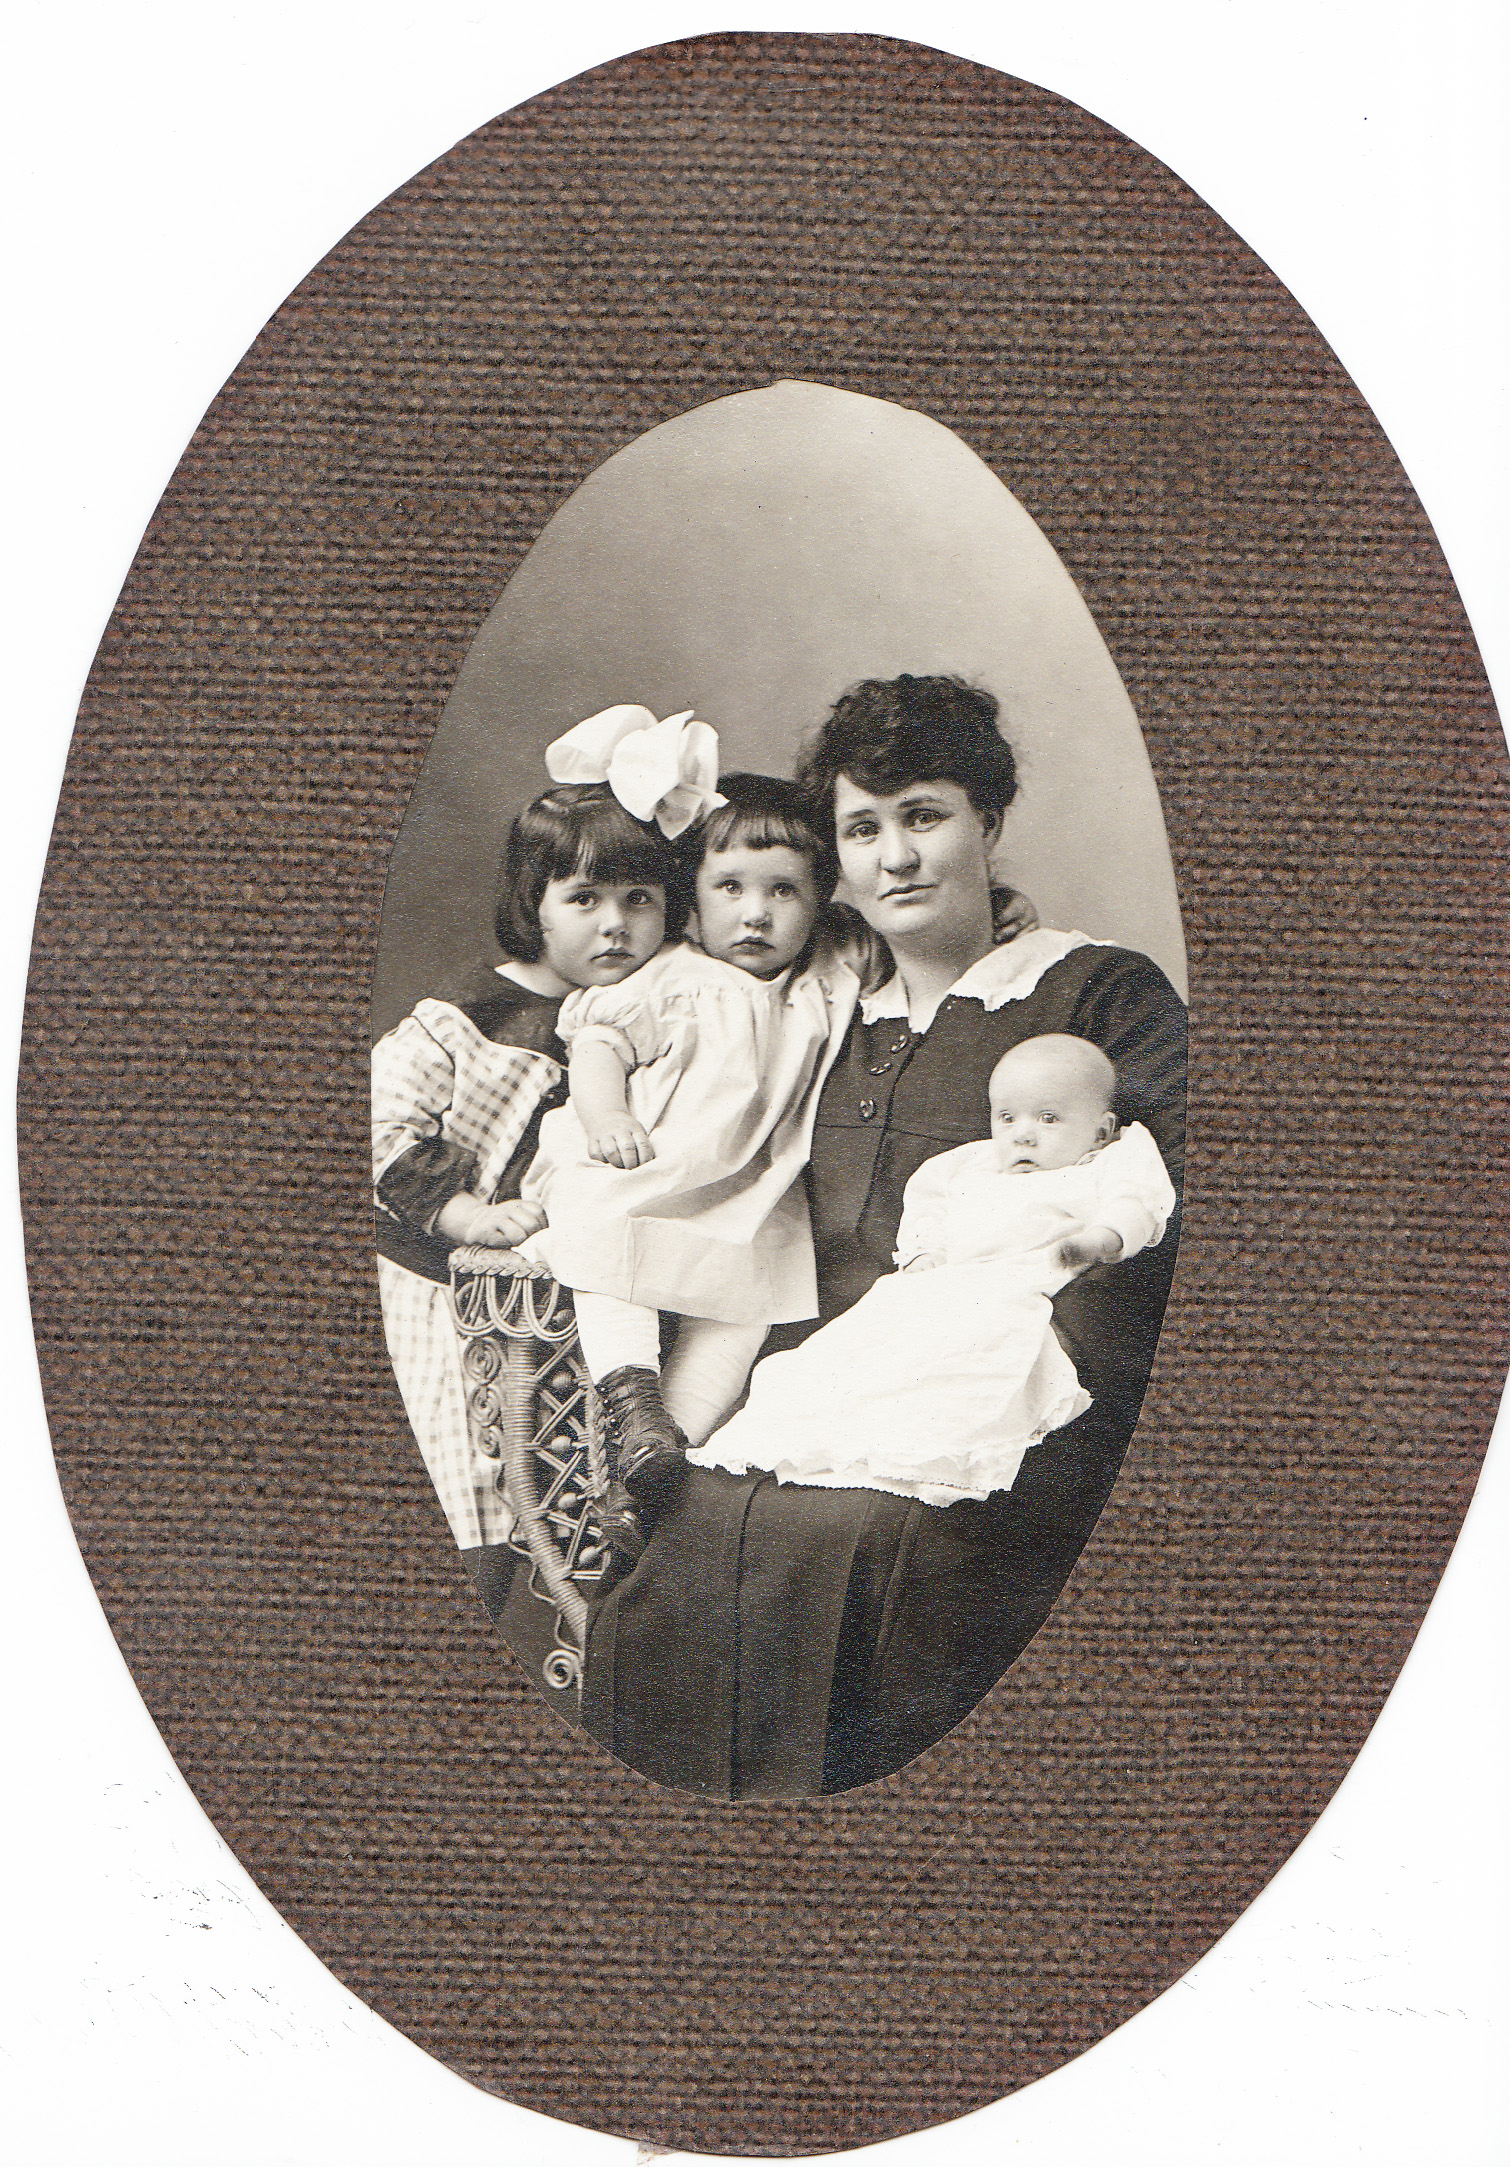 Mary Dean & O’Malley Children—My maternal grandmother, with her brother’s children, one of whom she and my grandfather raised from shortly after birth to about 12 years of age due to the mother’s death shortly after birth of the child.